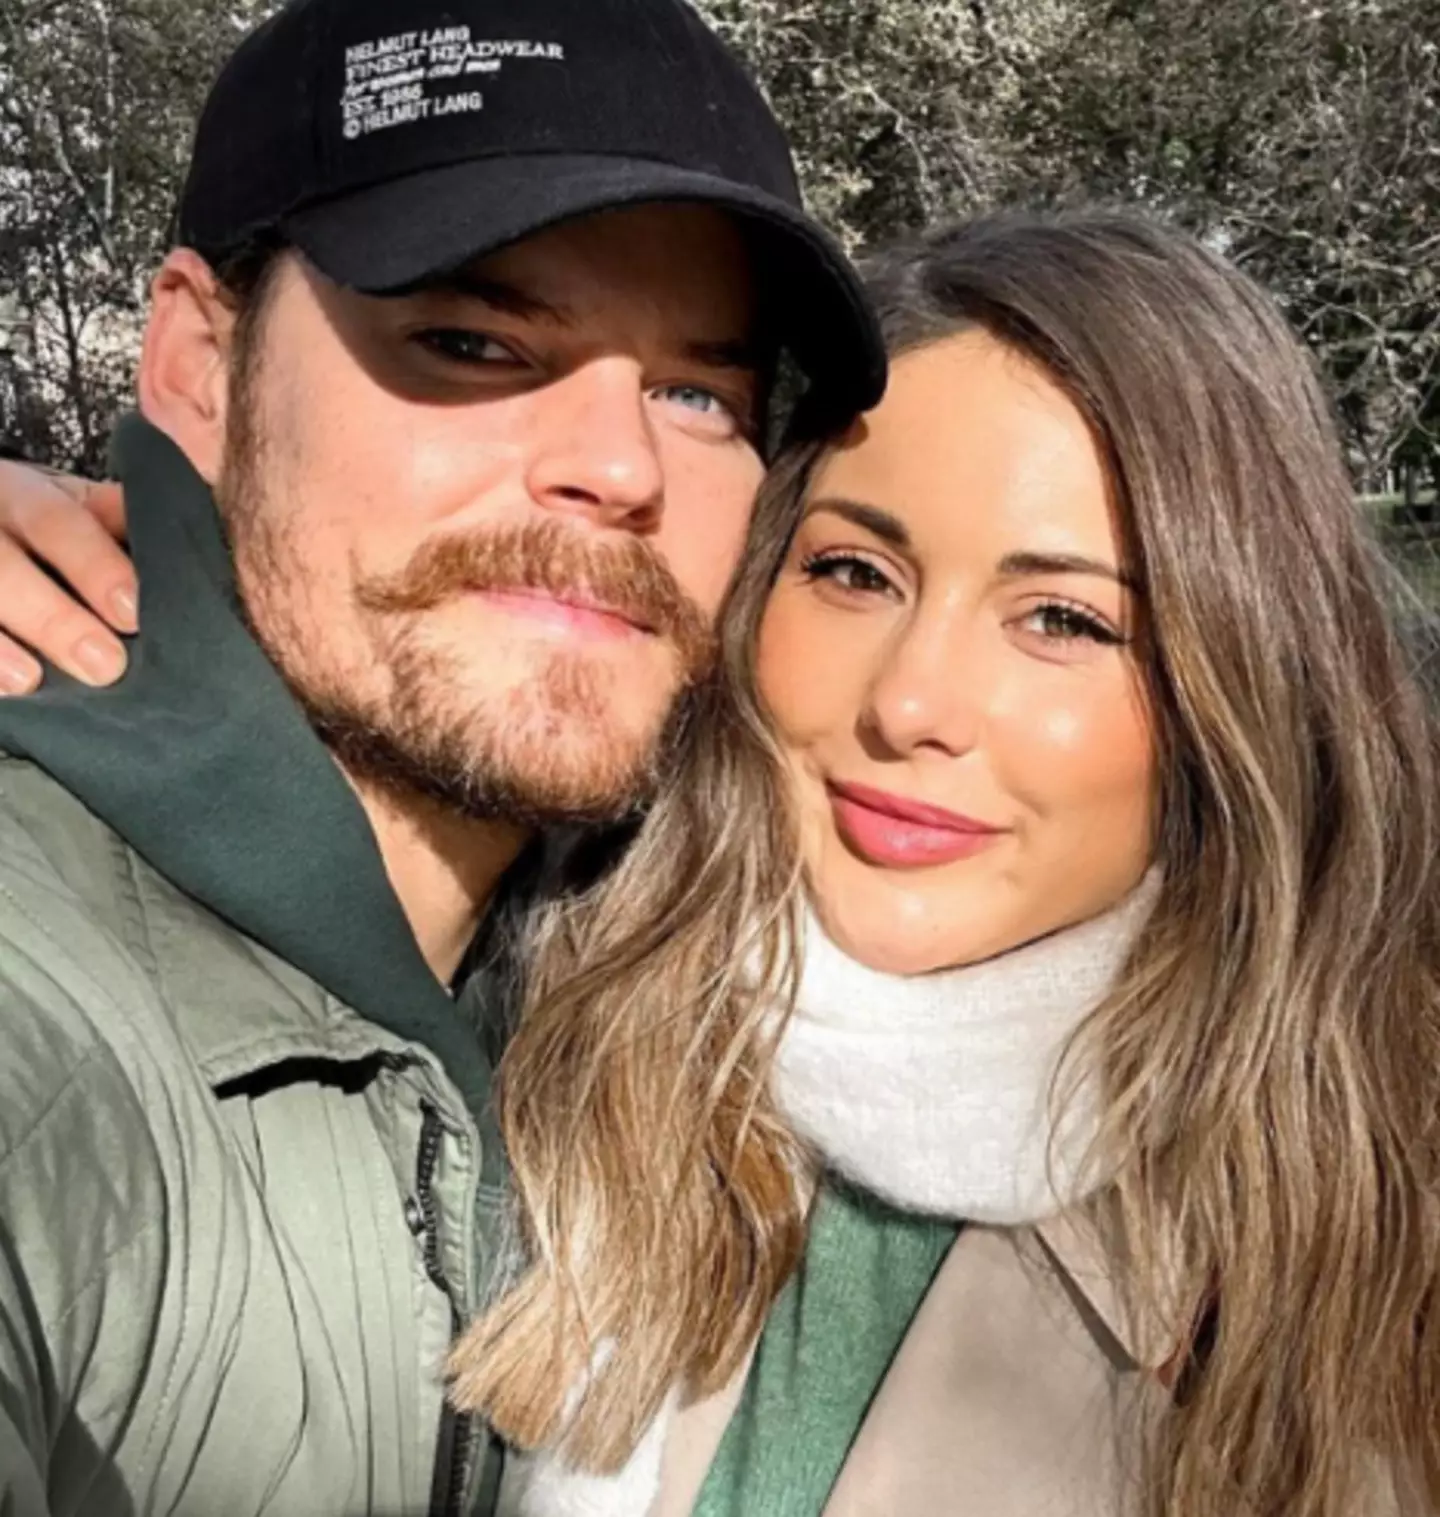 Louise's fiance Ryan gave her fans a health update.